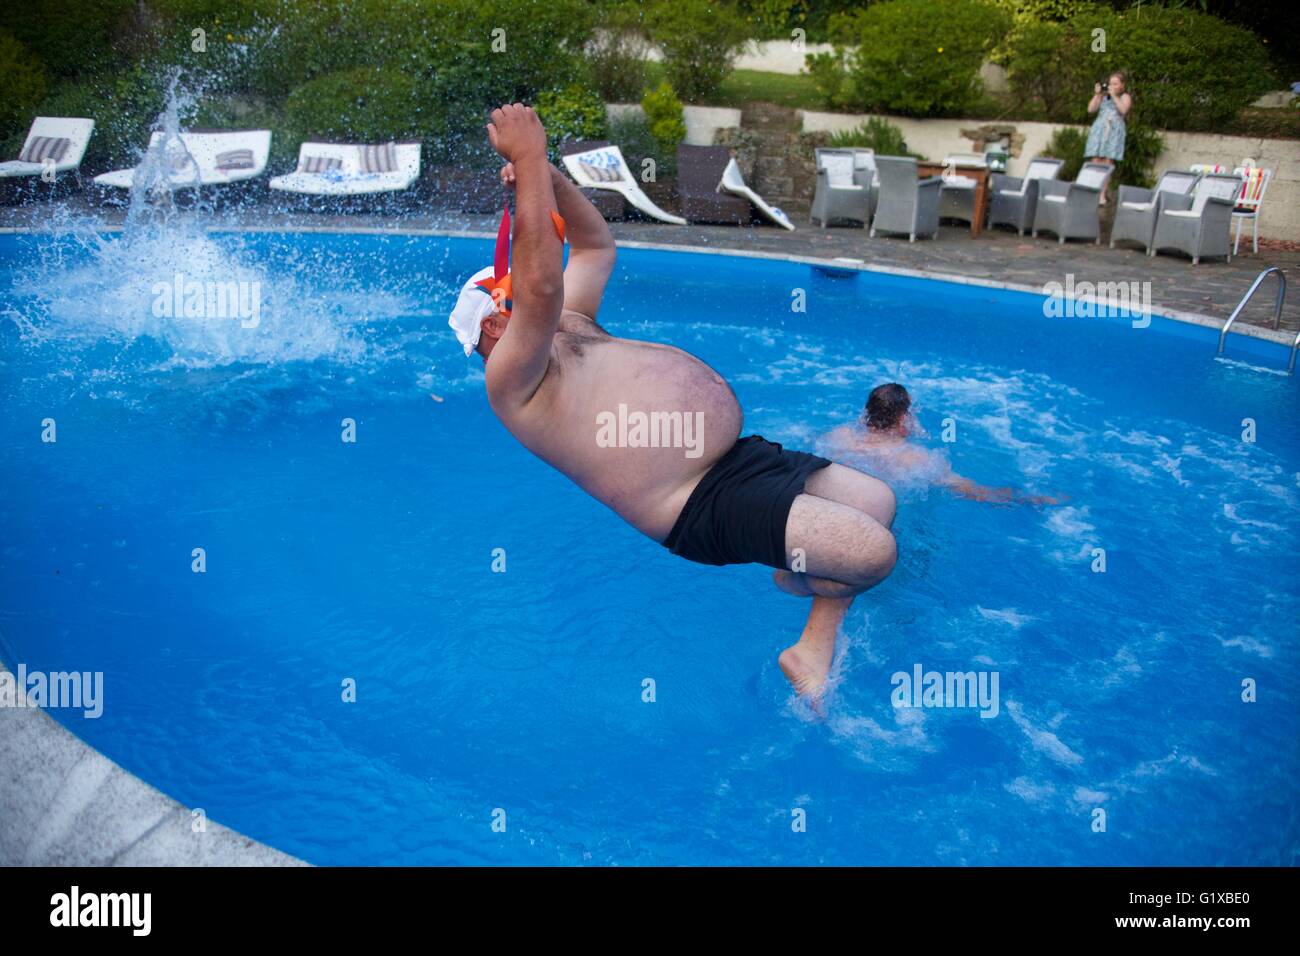 Overweight adult male jumping in swimming pool Stock Photo